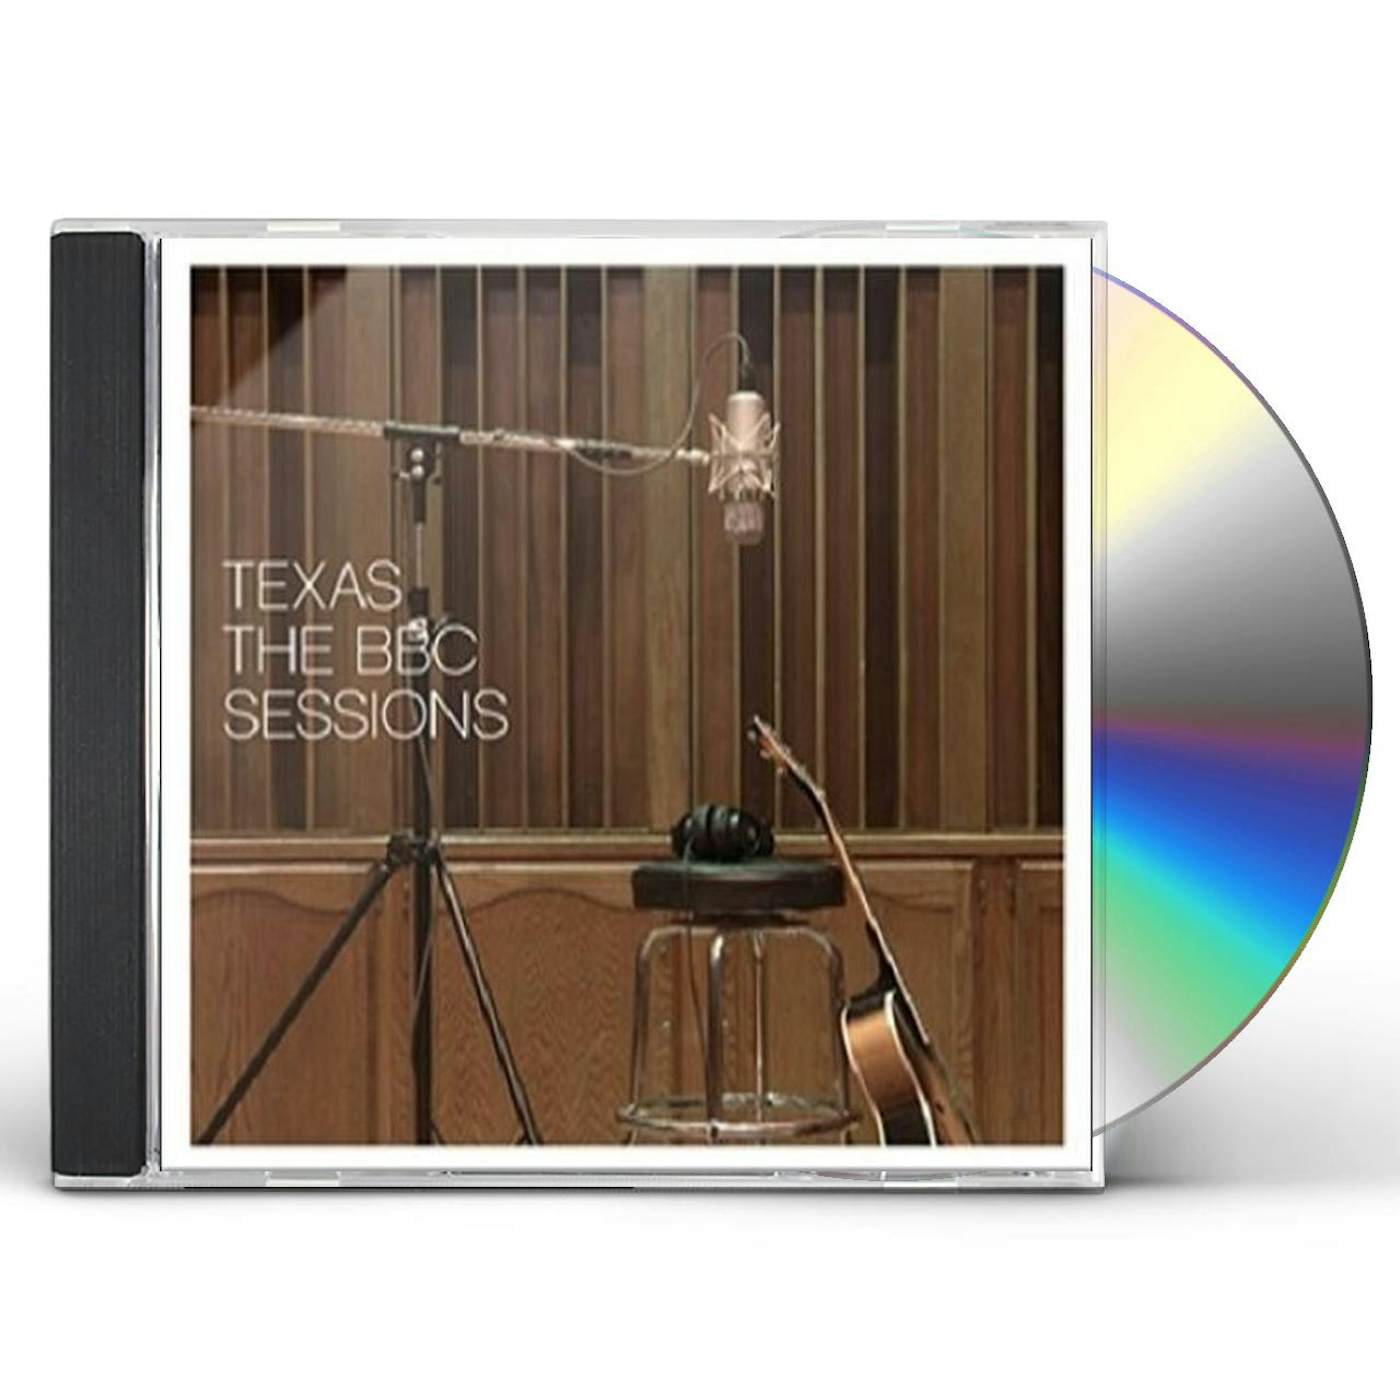 Texas COMPLETE BBC SESSIONS CD